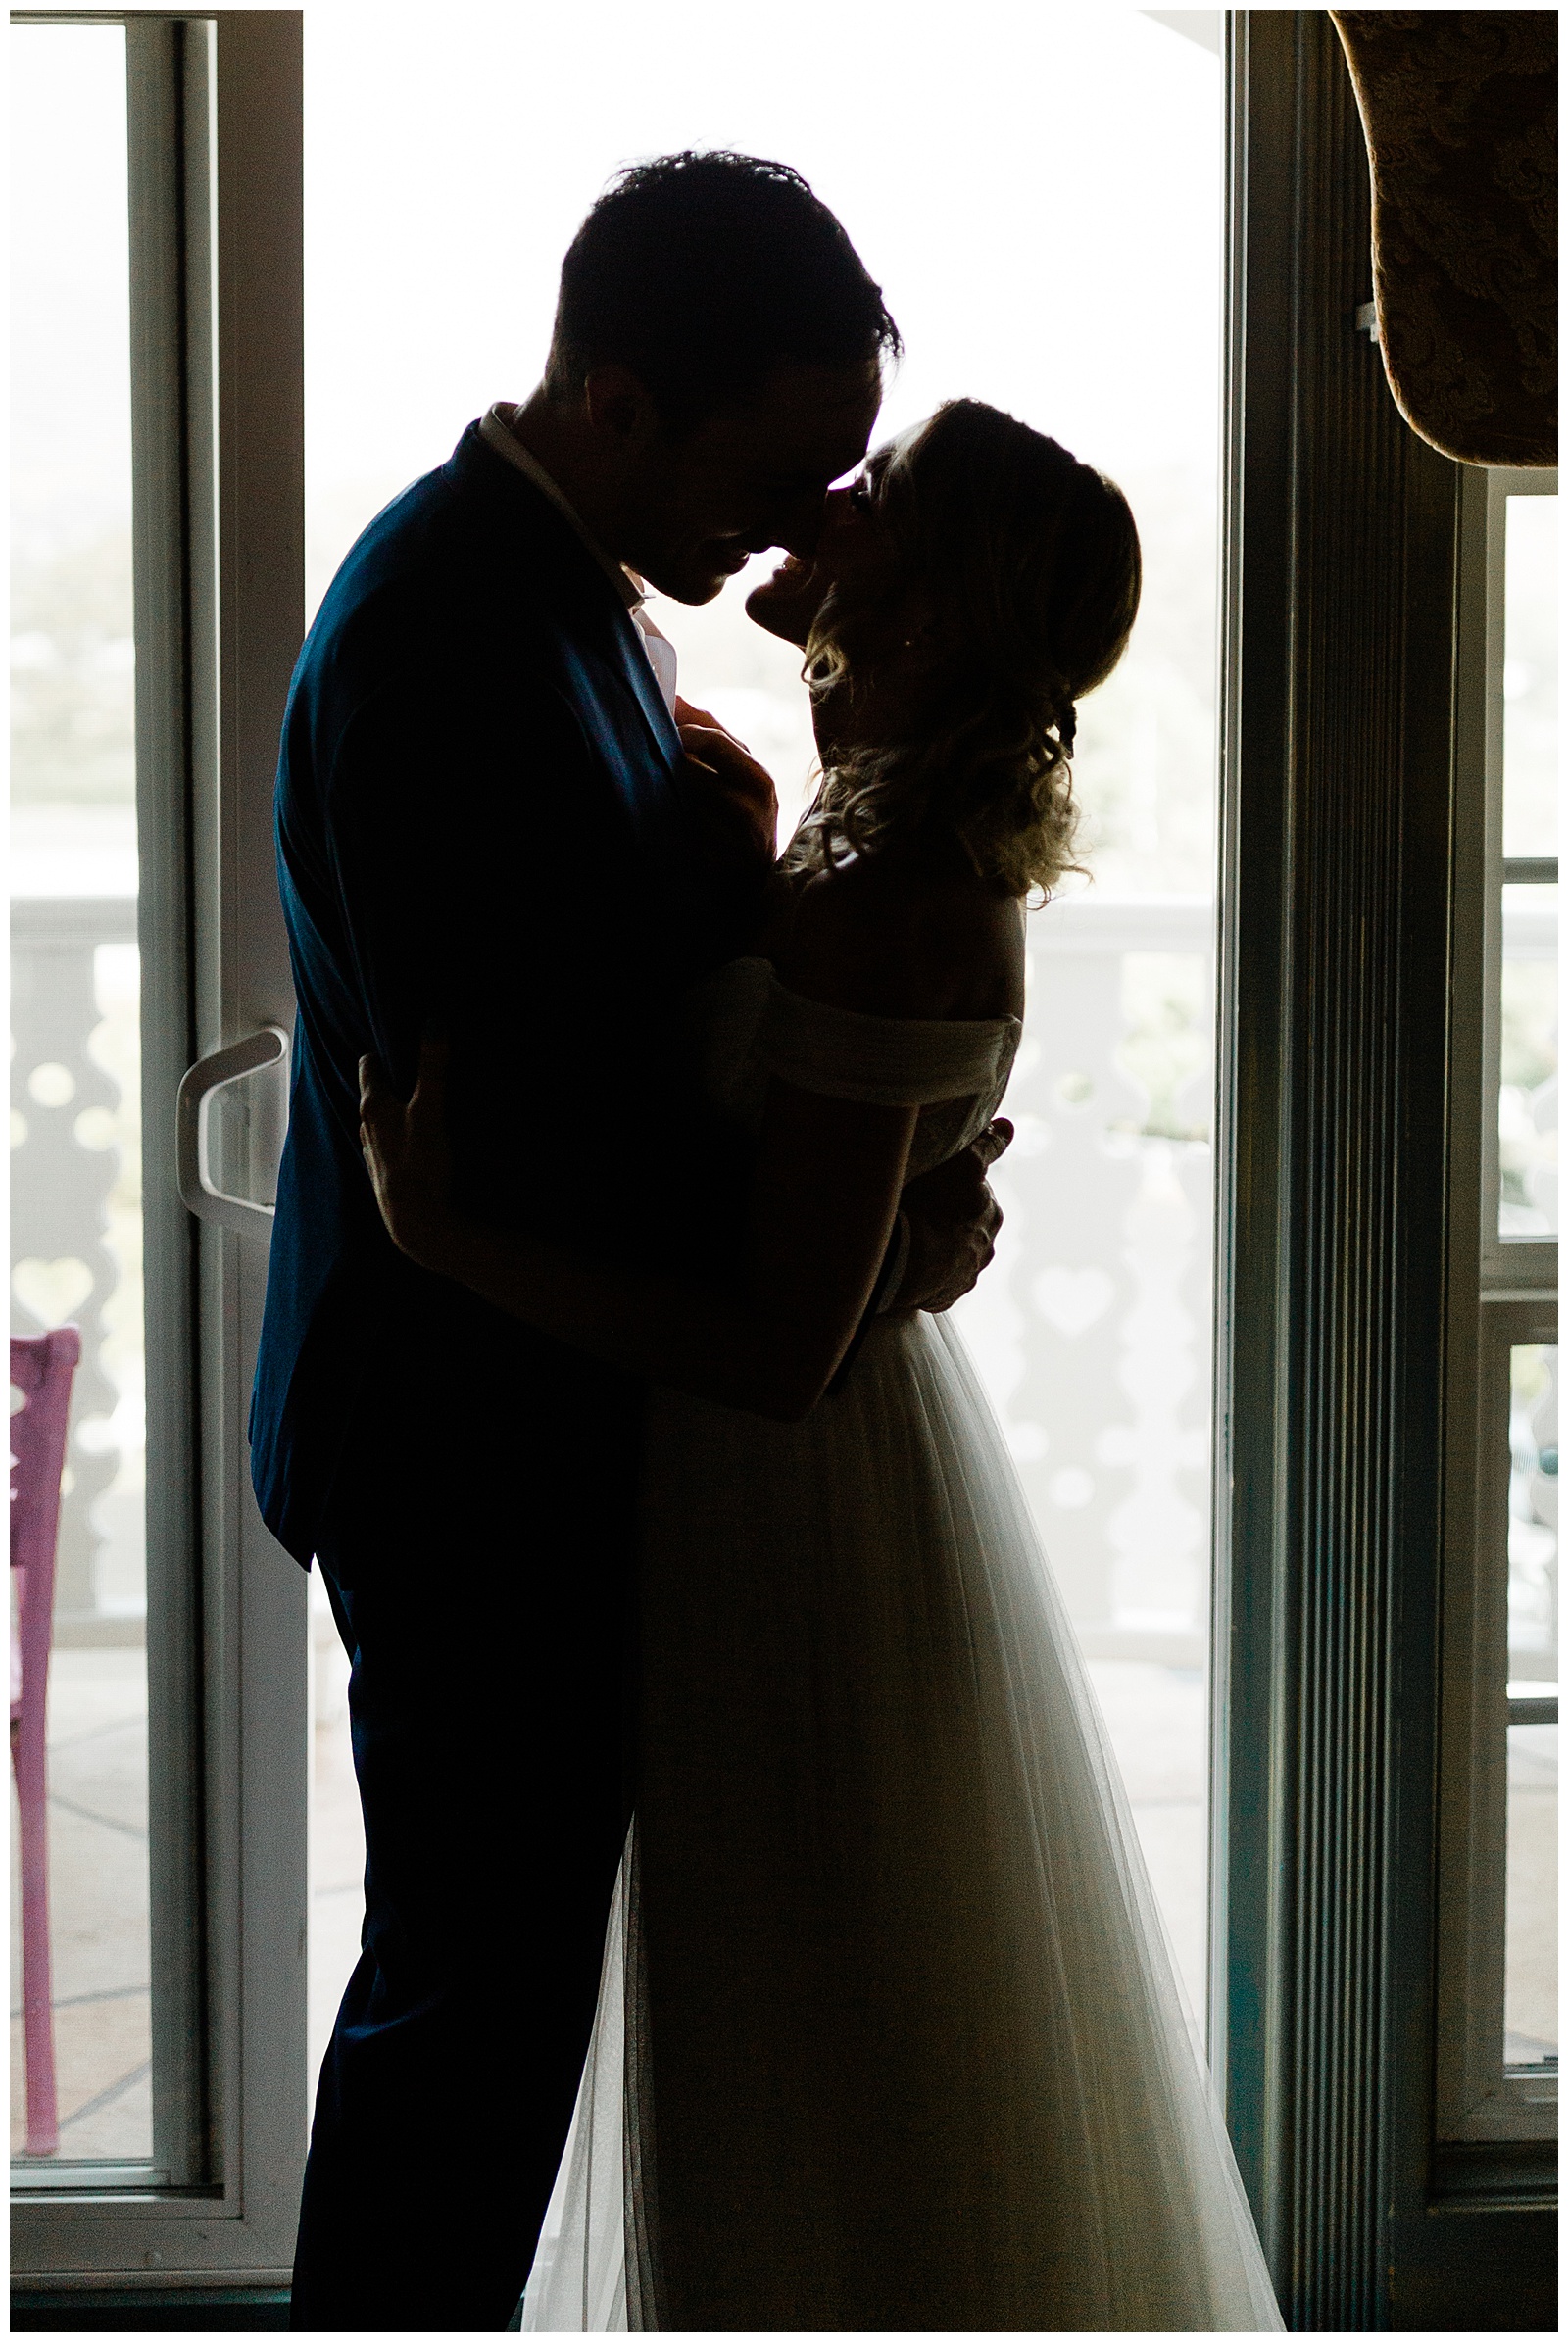 Silhouette shot of the bride and groom in front of a window